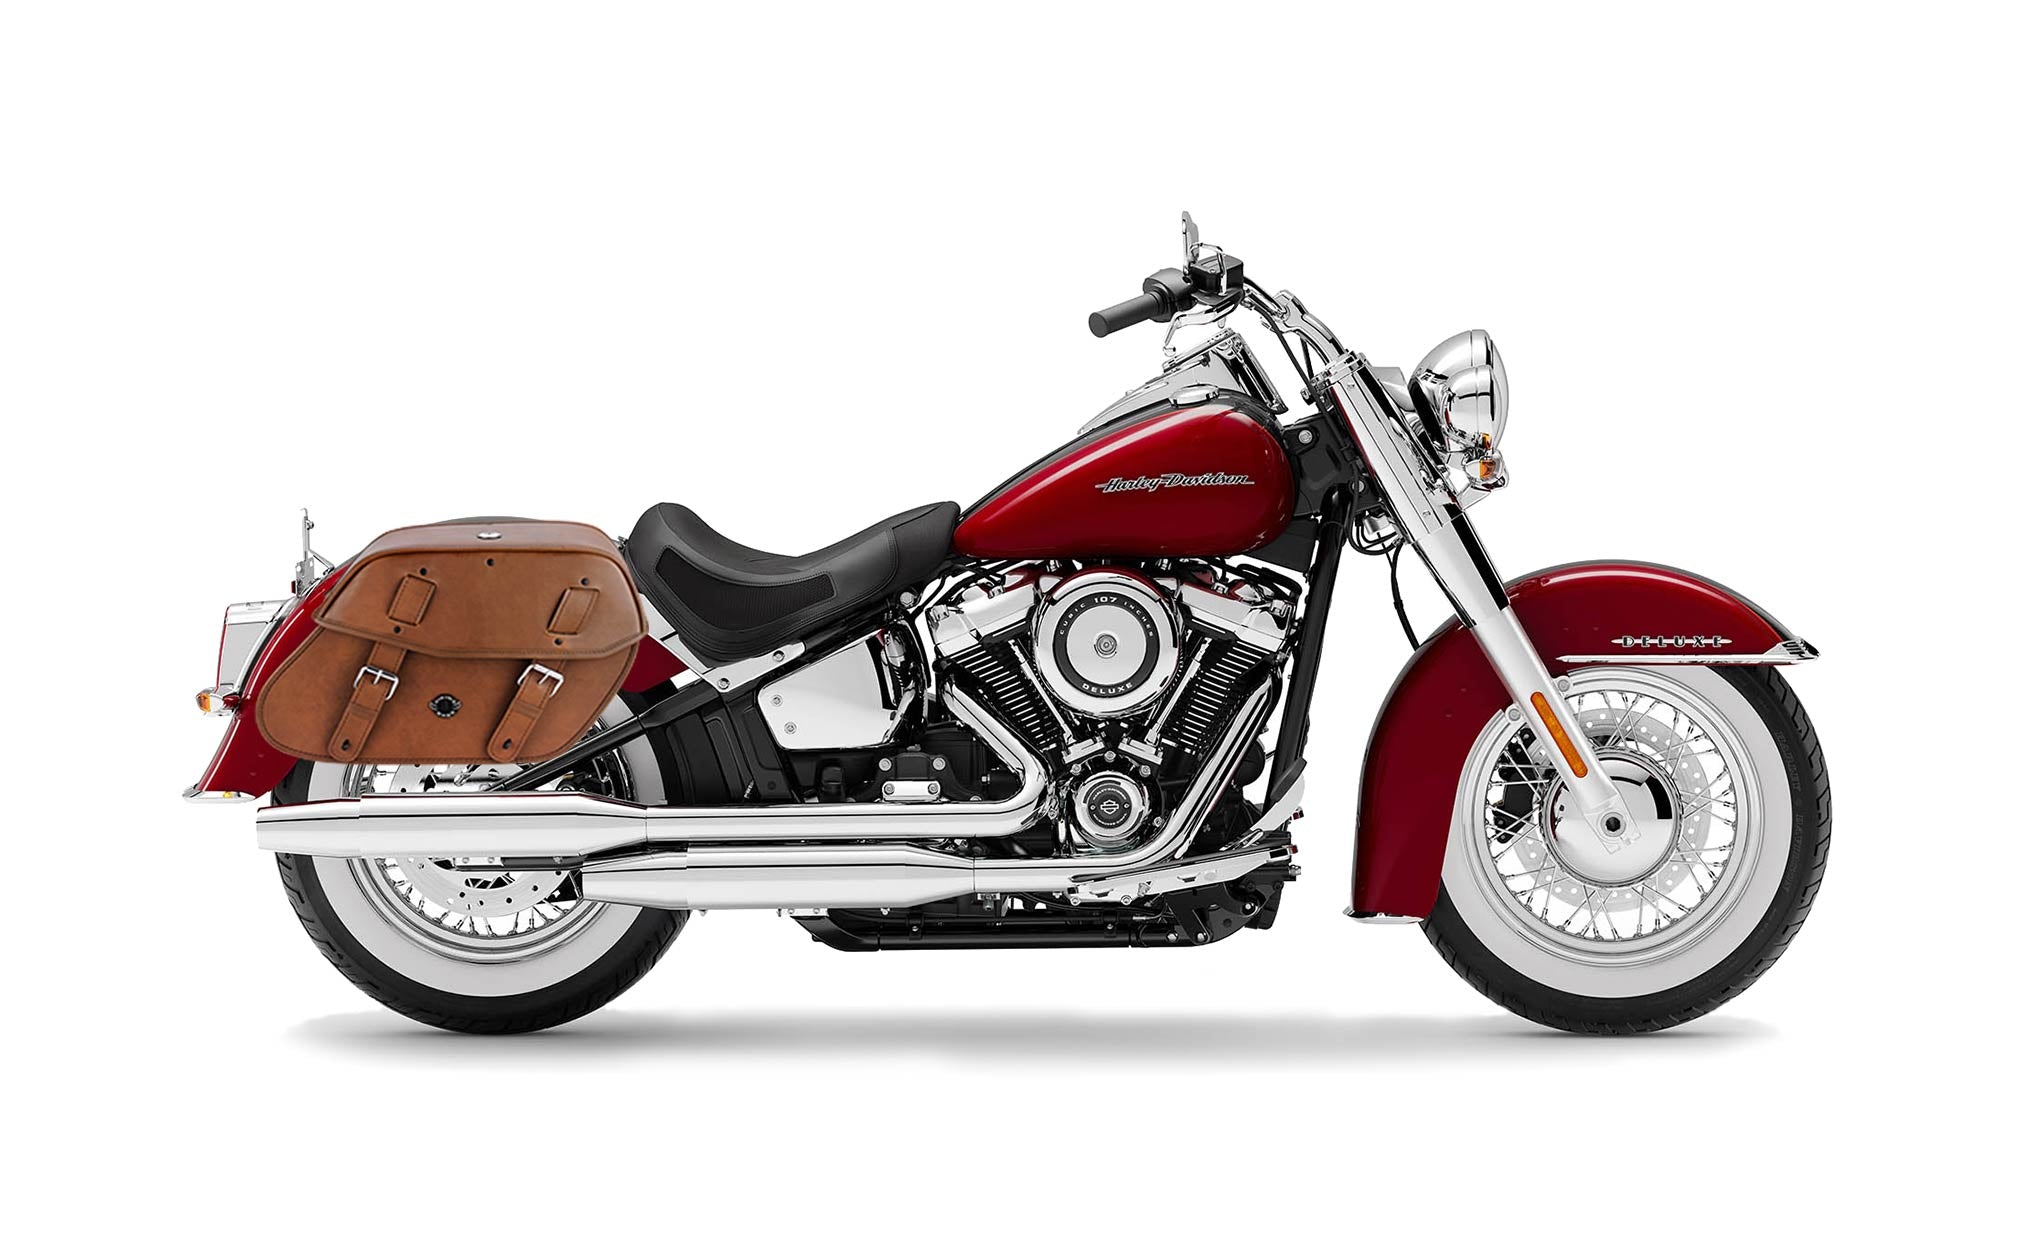 Viking Odin Brown Large Leather Motorcycle Saddlebags For Harley Softail Deluxe Flstn I on Bike Photo @expand